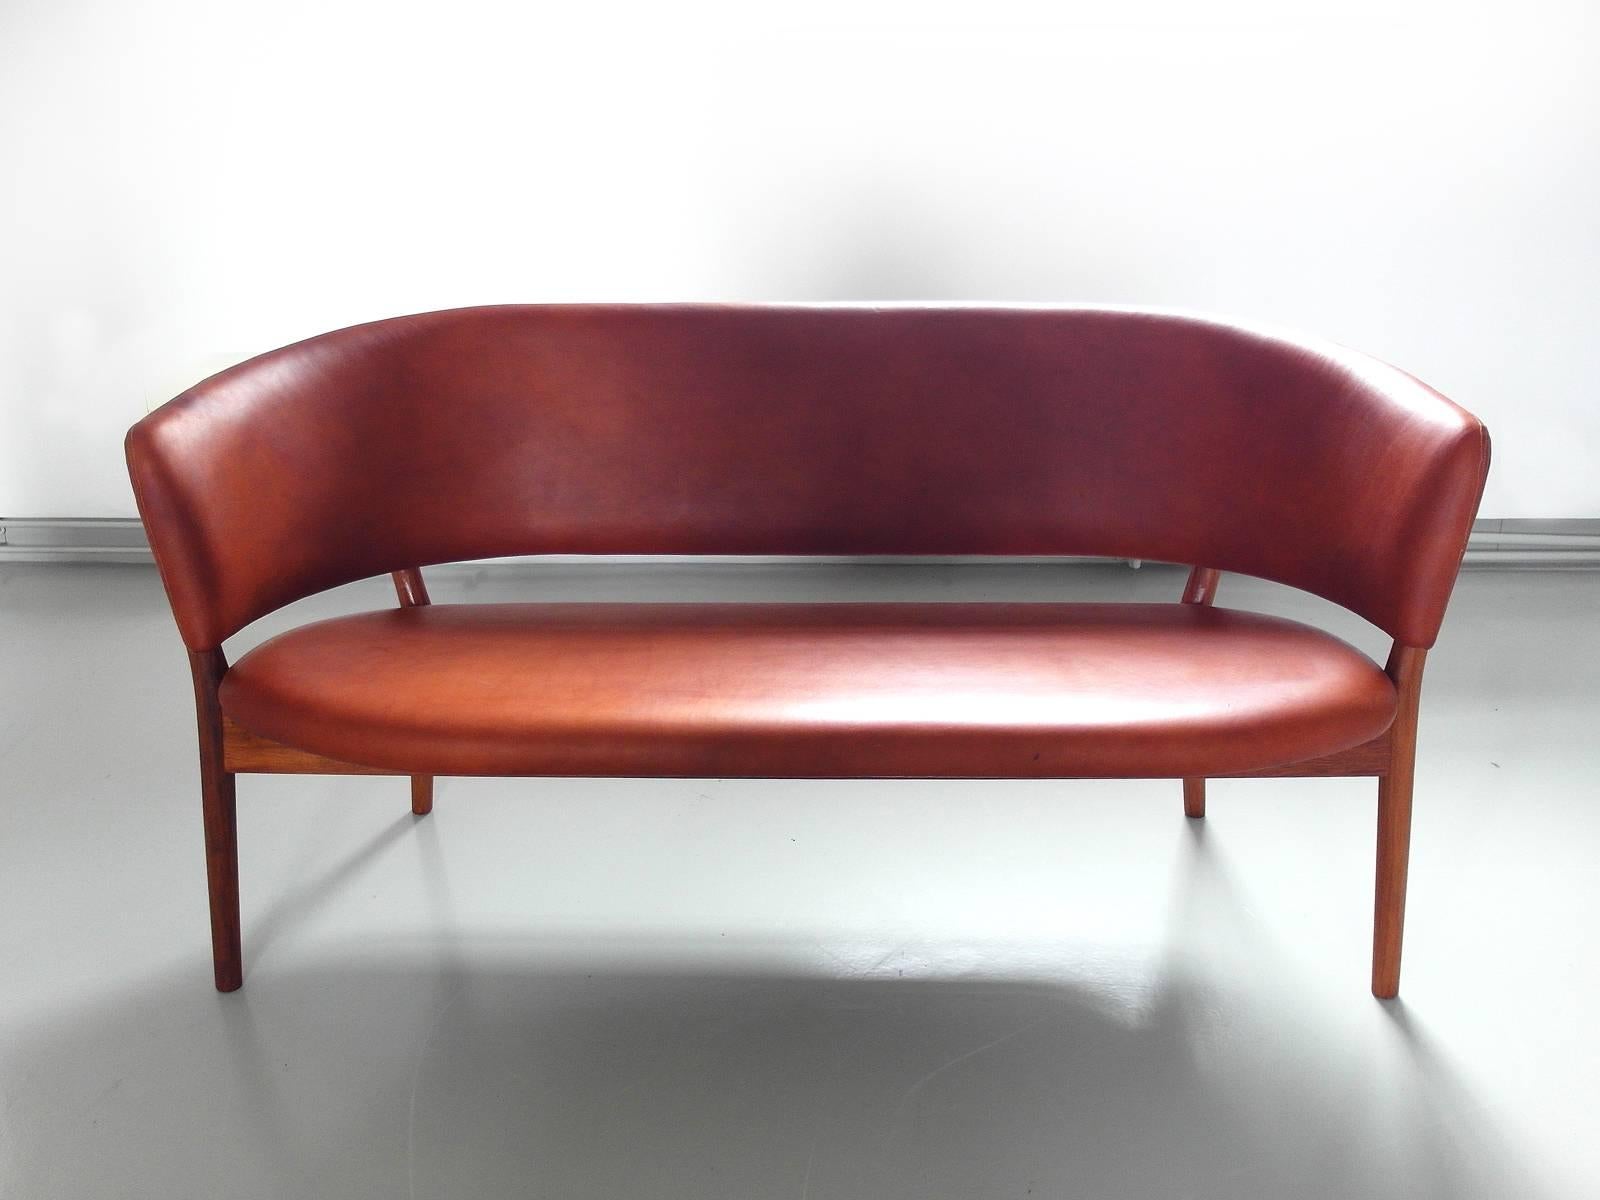 Beautiful and elegant shell sofa model ND82 designed by Nanna Ditzel in 1958, manufactured by Snedkergaarden, Denmark. The sofa is a classic Ditzel design. Circular in form, the arms and back are one piece which wraps around the sitter. The legs